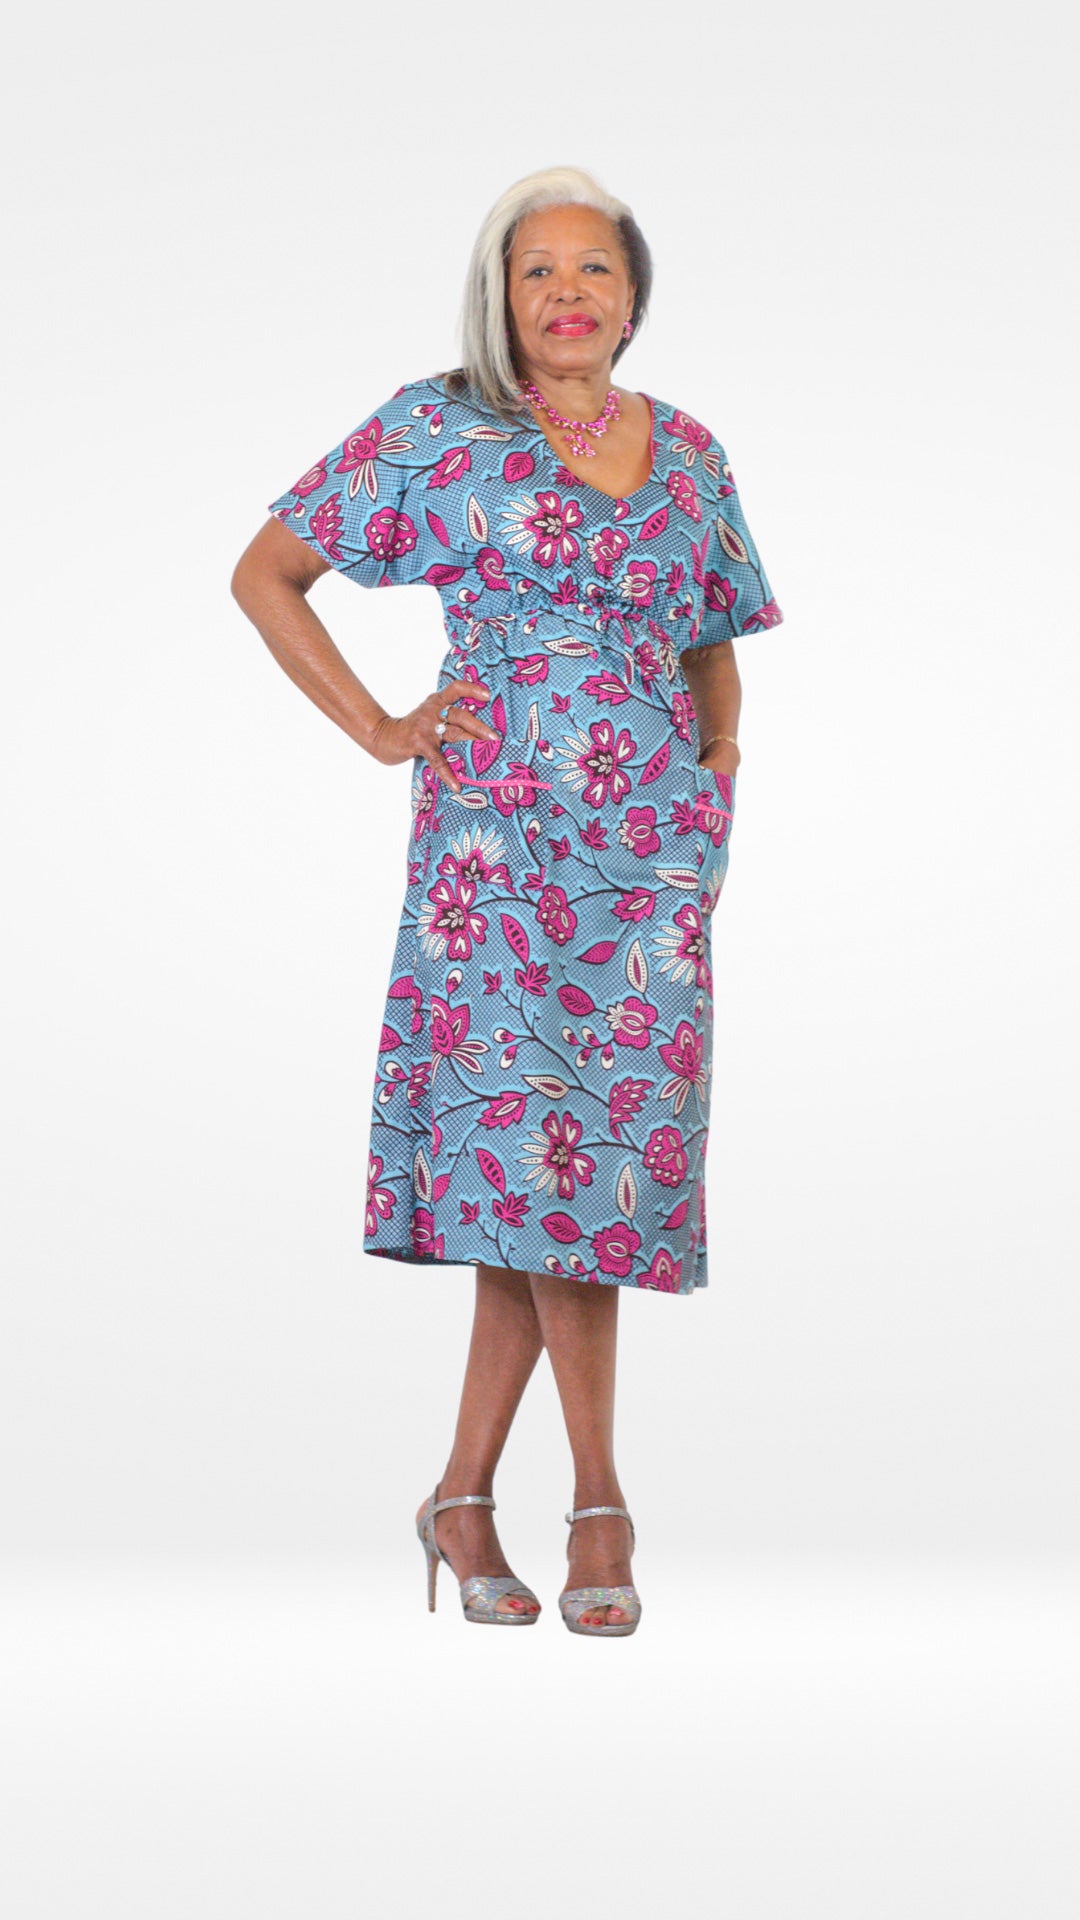 A model posing confidently in a blue kaftan dress with a pink floral print. The lively floral patterns, accentuated by this dynamic pose, create a stylish and flattering silhouette, capturing the essence of this eye-catching ensemble, paired with silver open toe high heels and a pink necklace.